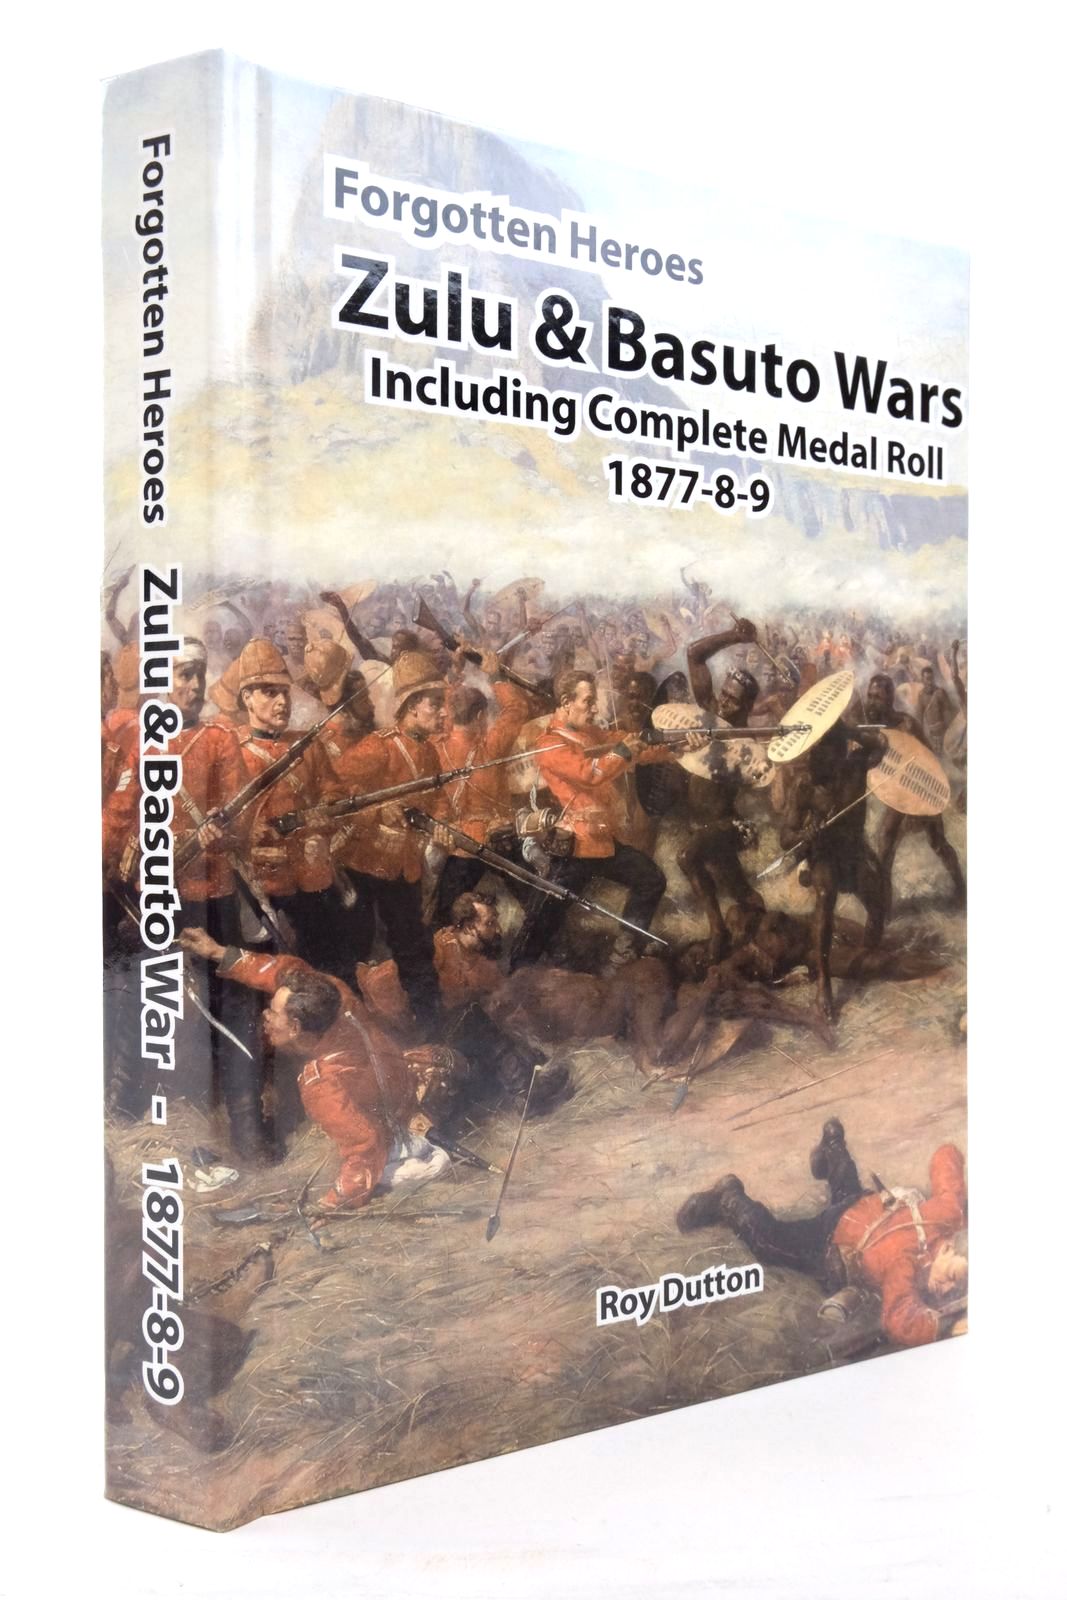 Photo of FORGOTTEN HEROES: ZULU & BASUTO WARS INCLUDING COMPLETE MEDAL ROLL 1877-8-9 written by Dutton, Roy (STOCK CODE: 2138377)  for sale by Stella & Rose's Books